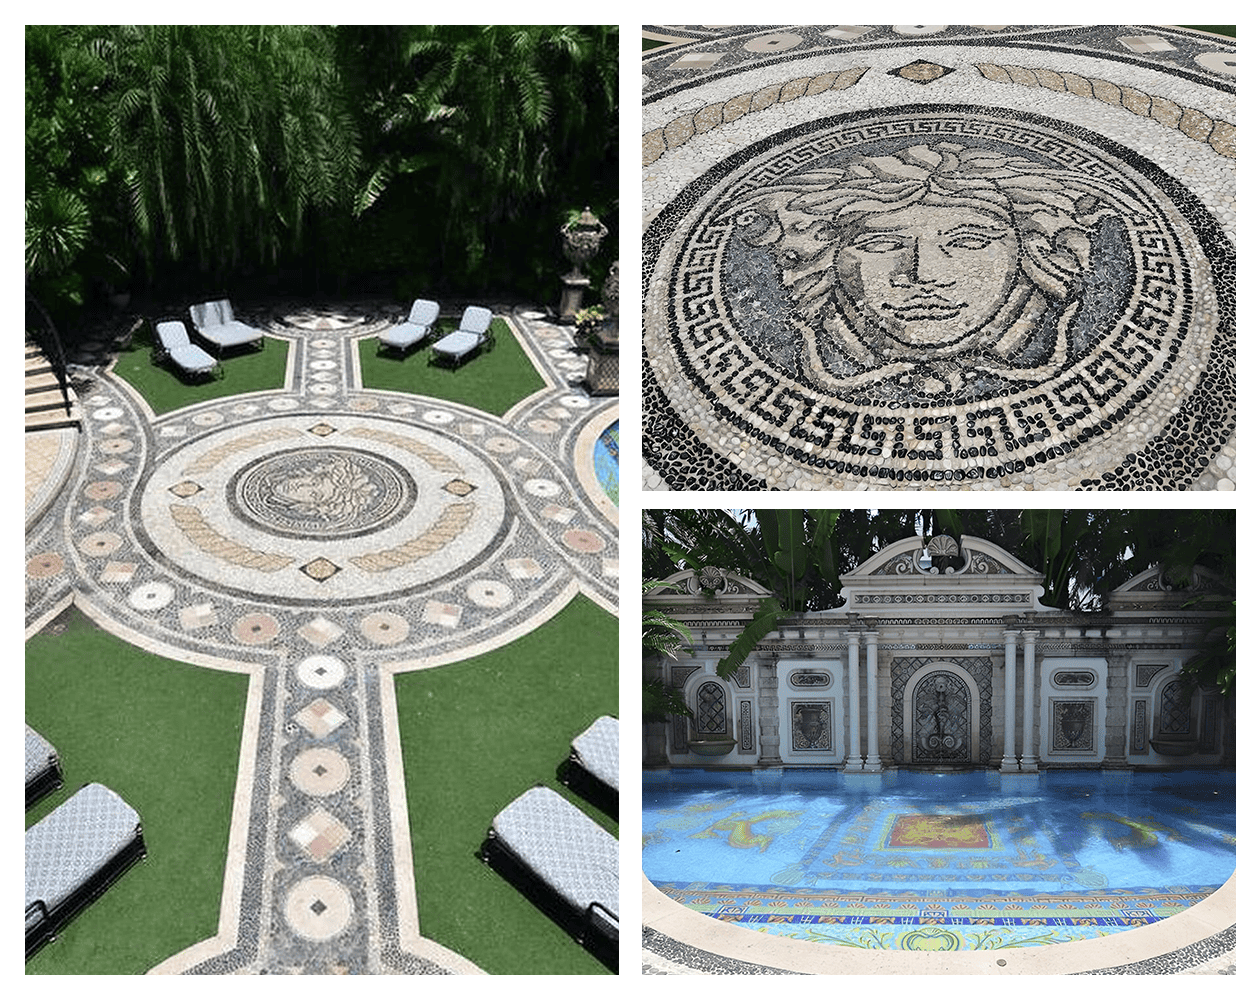 Versace Mosaic floor design in an outdoor setting with greenery and architectural elements.